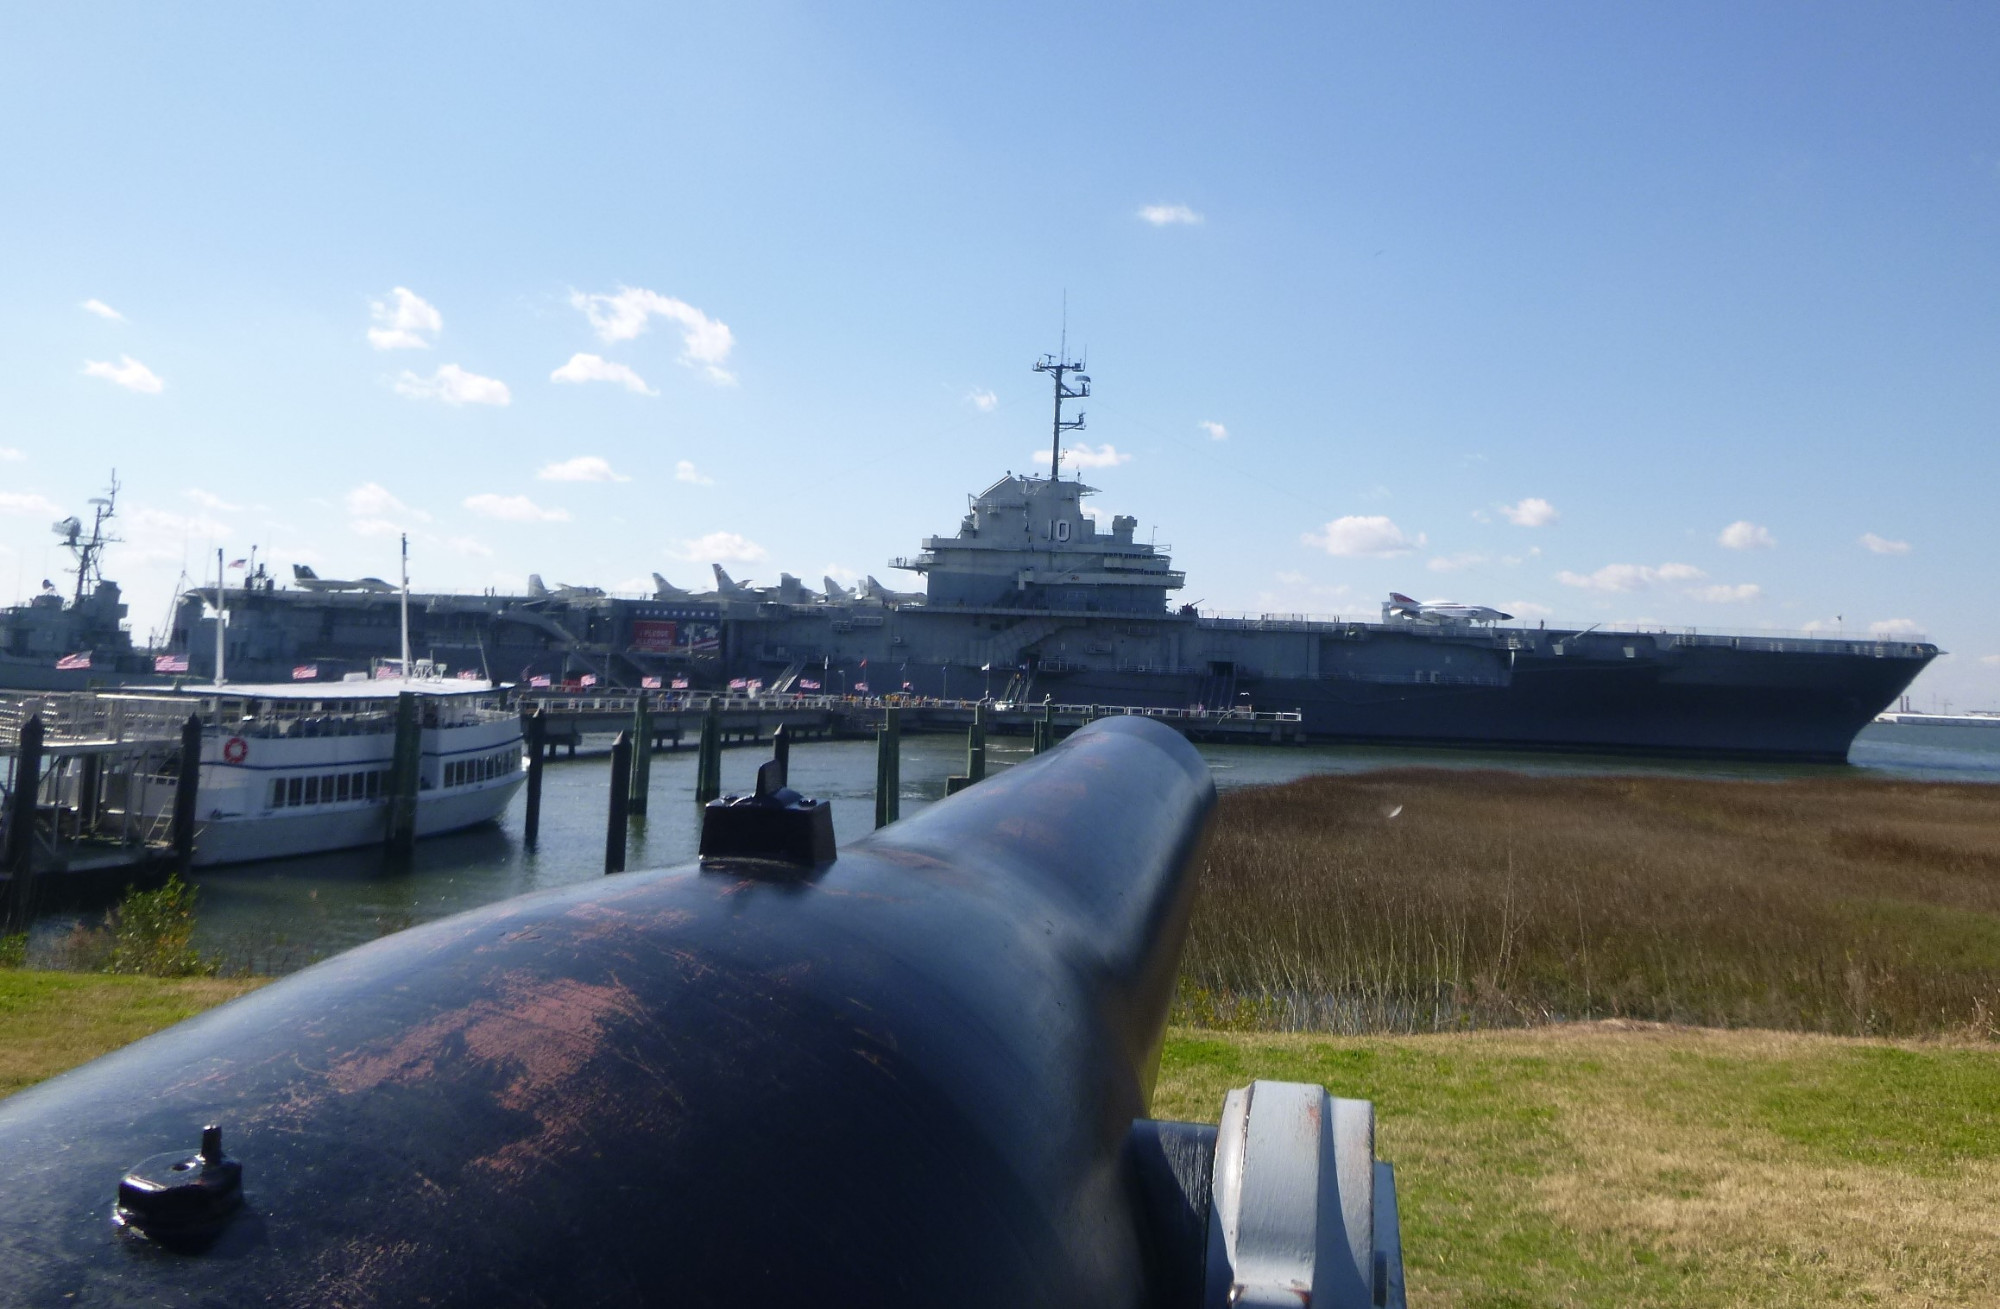 In sight of the Yorktown